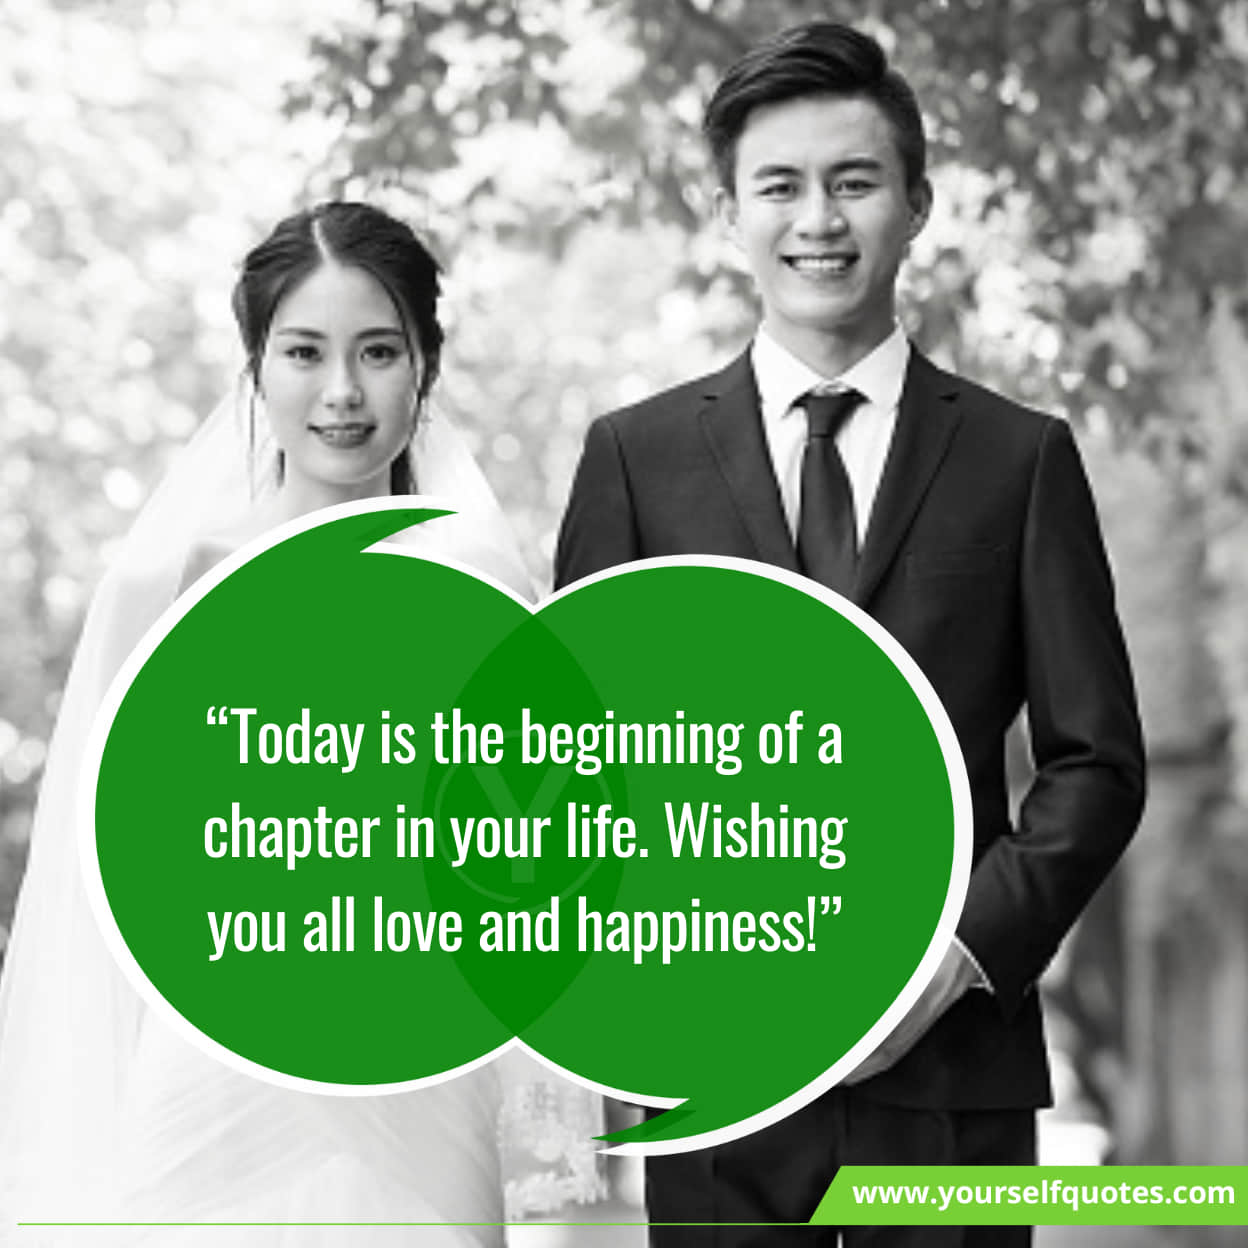 Best Messages For Wedding Wishes